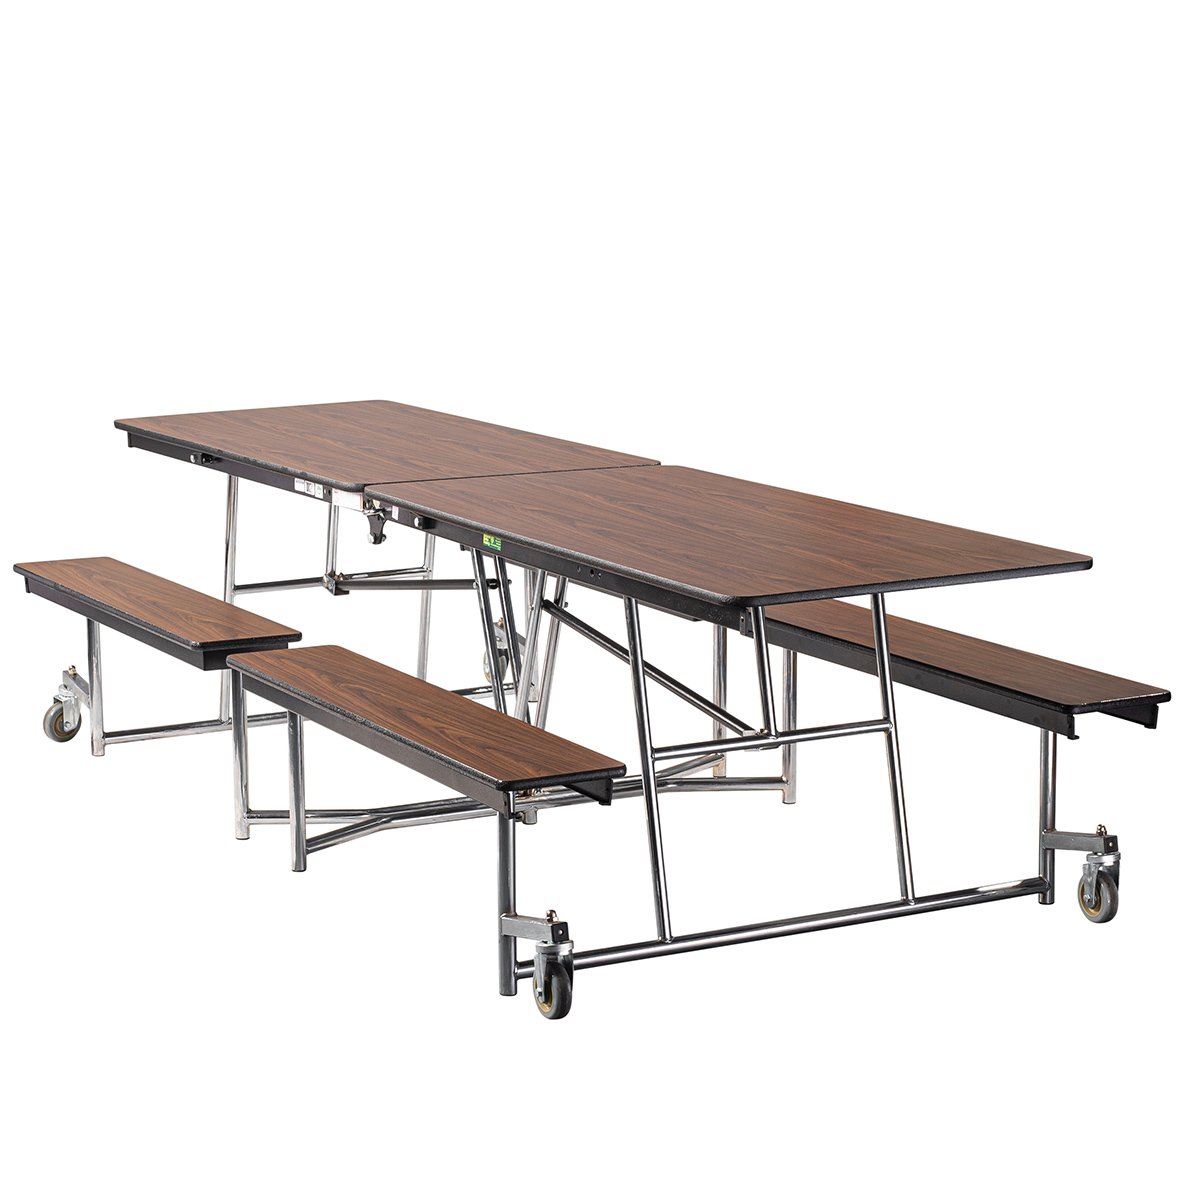 NPS 10′ Mobile Bench Cafeteria Table, MDF Core, Protect Edge, Chrome Frame